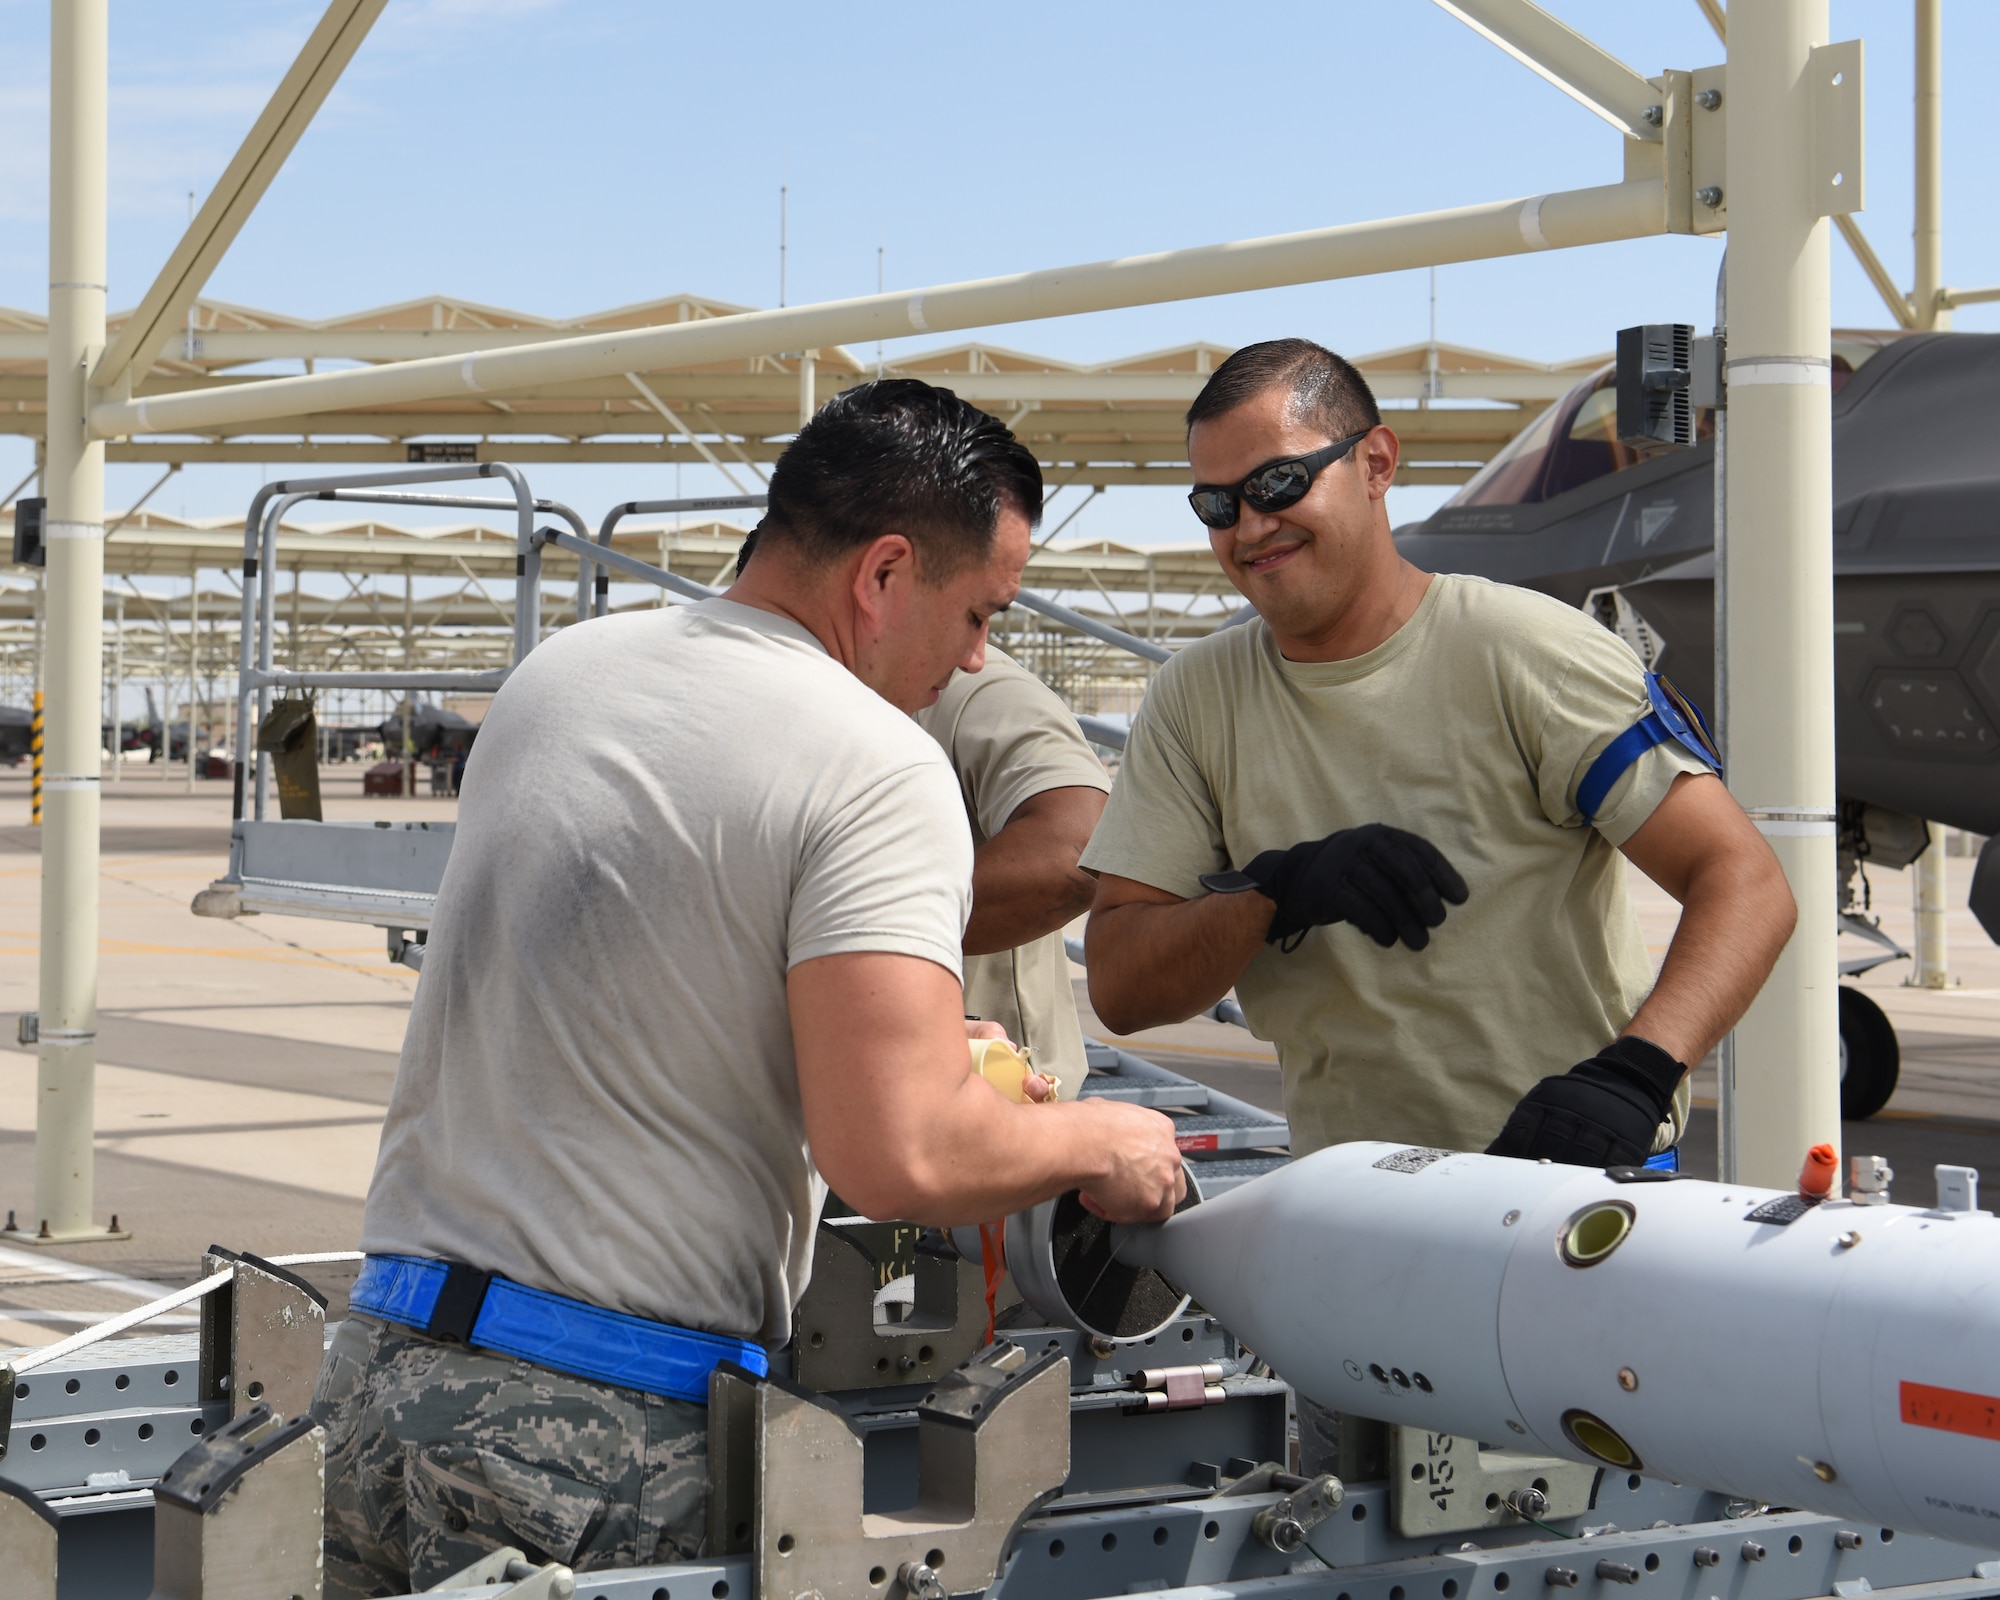 U.S. Air Force Reserve Staff Sgt. Joe Hernandez, 62nd Aircraft Maintenance Unit F-35 Lightning II weapons team chief, and U.S. Air Force Reserve Tech Sgt. Jose Contreras, 62nd AMU F-35 Lightning II weapons load crew member, prepare munitions for aircraft loading, Aug. 15, 2018 at Luke Air Force Base, Ariz.